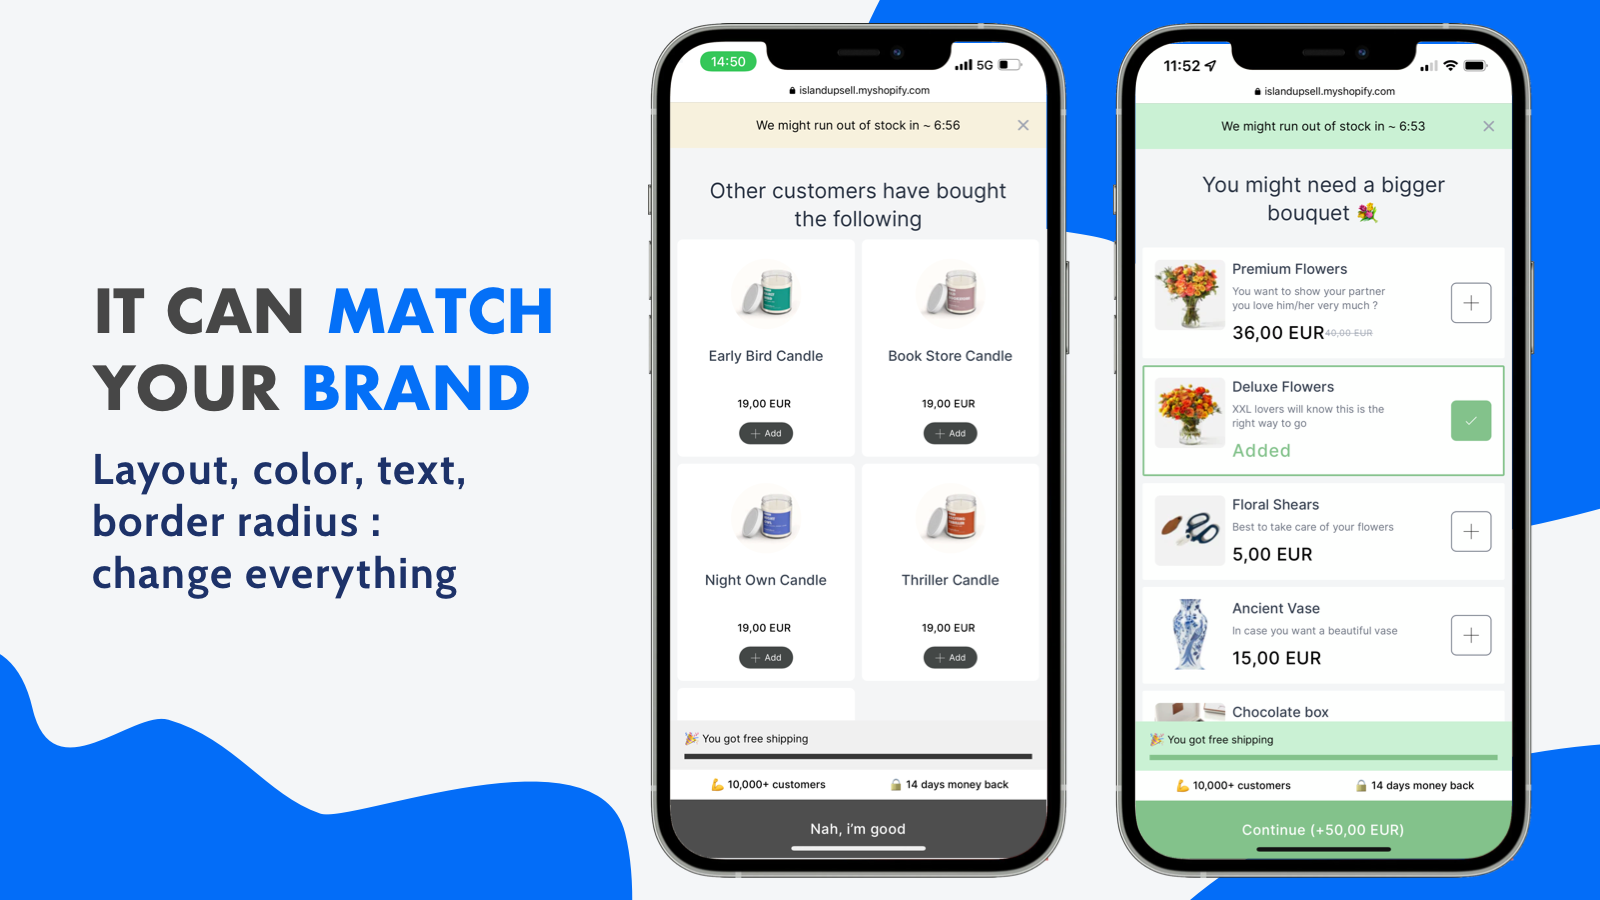 Match your brand easily by customizing every element